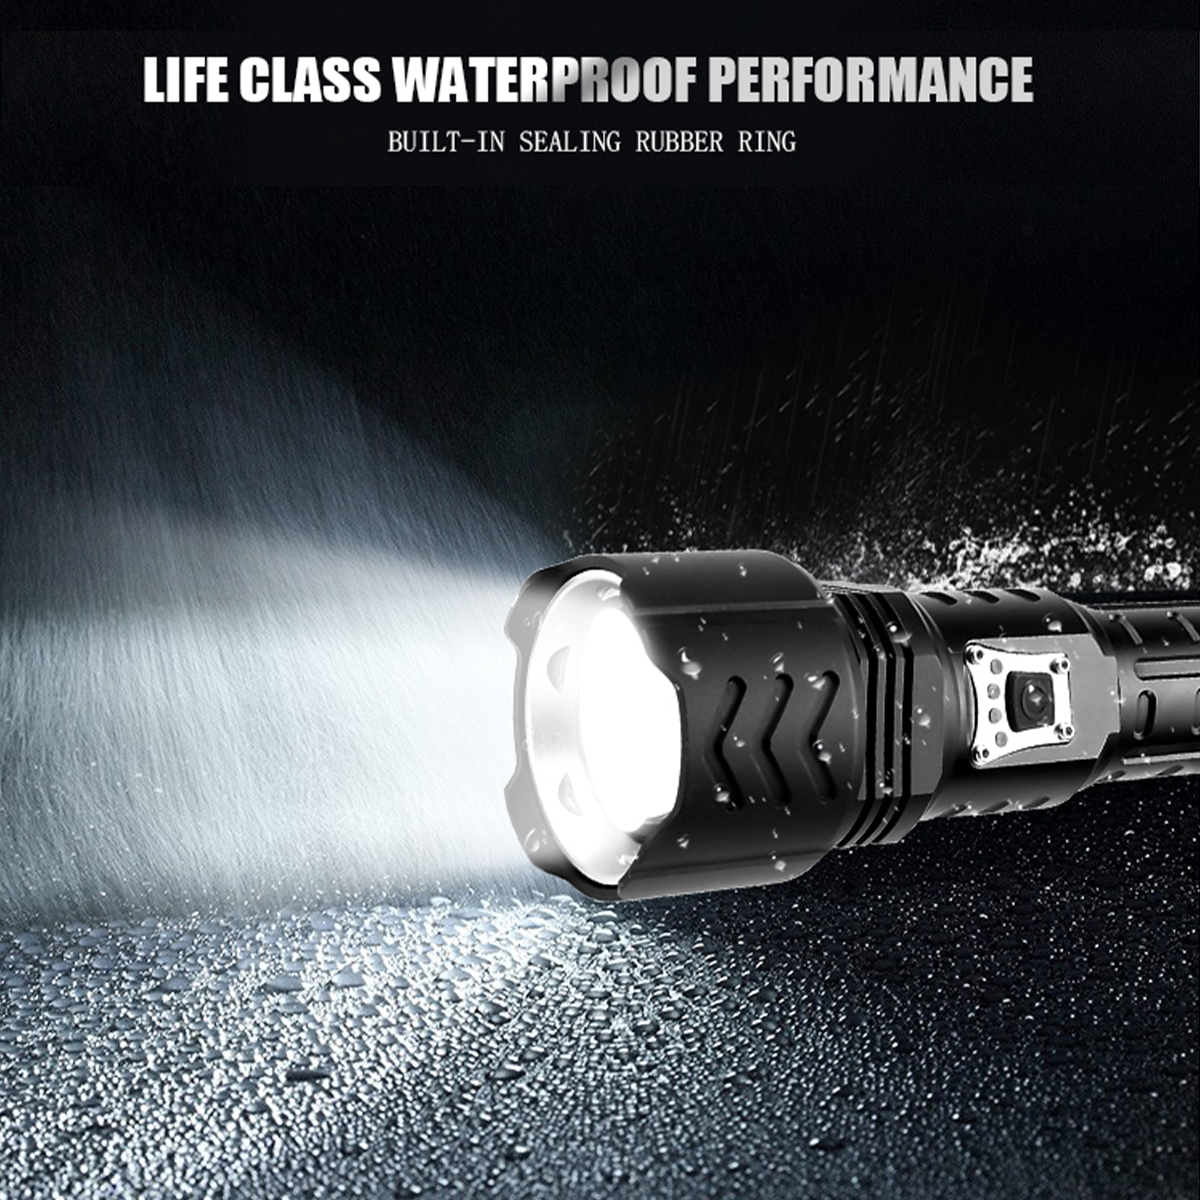 Find Portable USB Rechargeable 5 Modes Zoomable P70 2 Tactical Flashlight High Brightness Waterproof for Sale on Gipsybee.com with cryptocurrencies